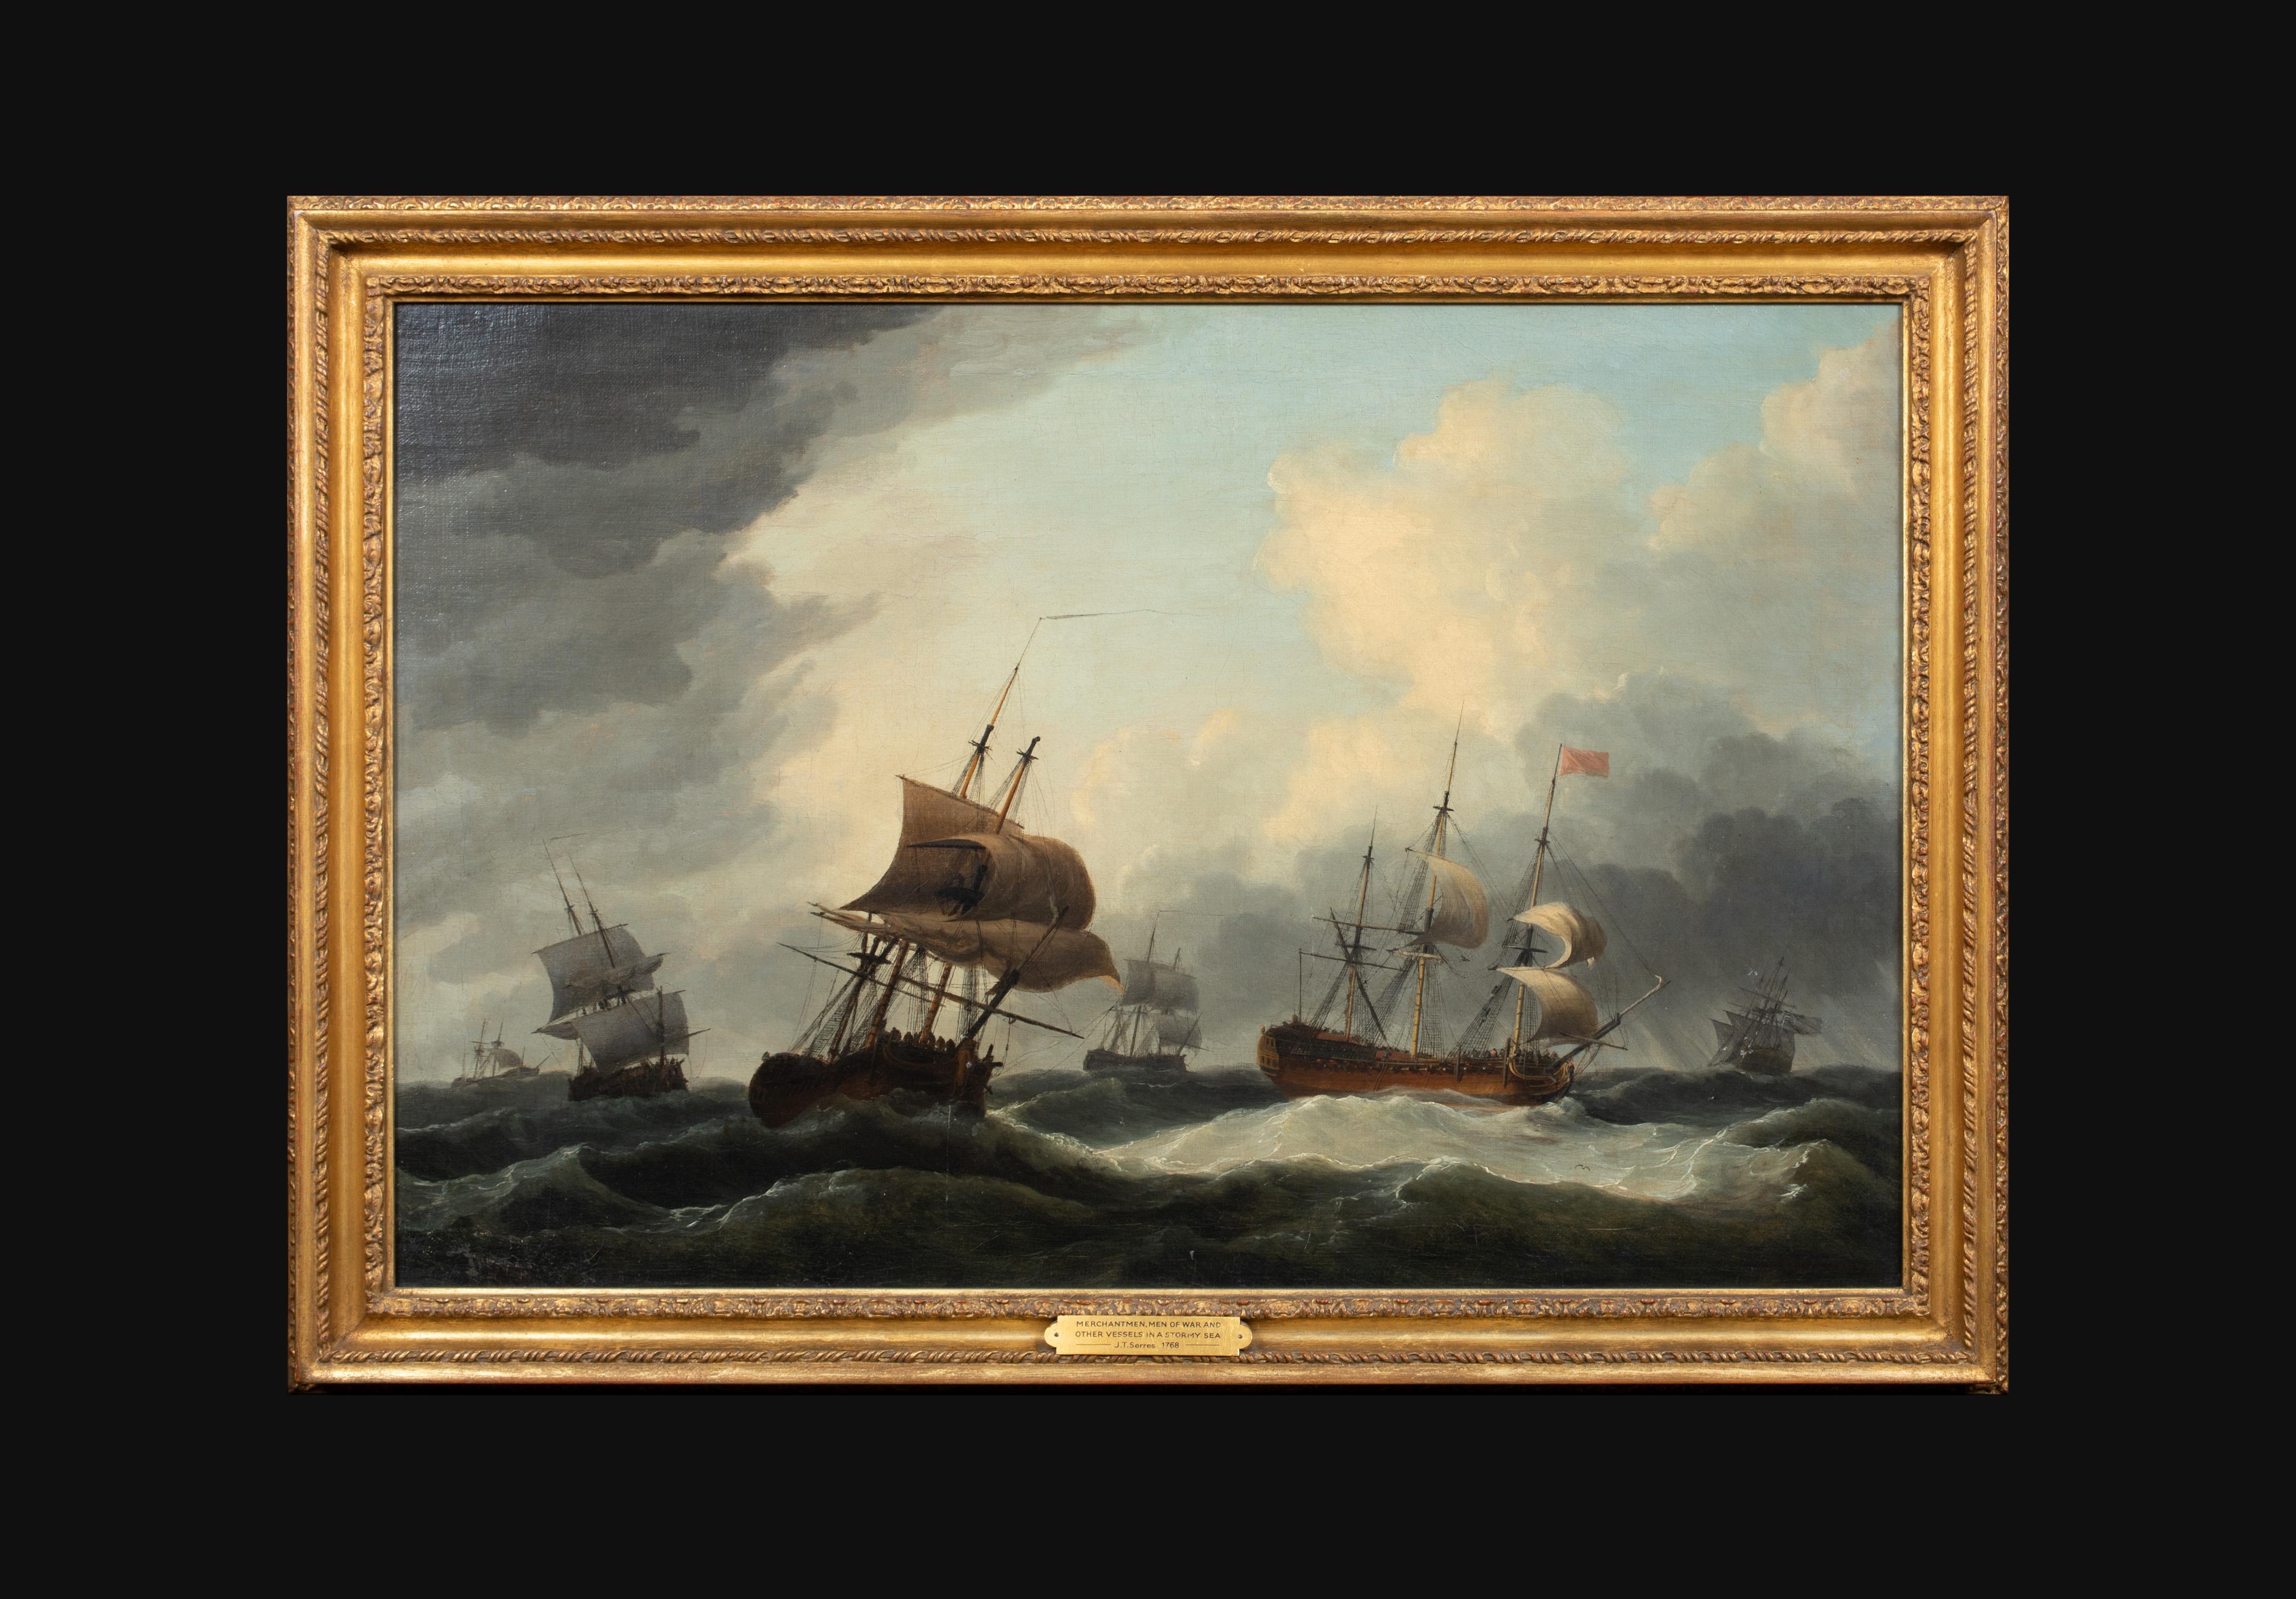 Merchantmen, Men O'war and other vessels in a stormy sea, 18th Century - Painting by John Thomas Serres